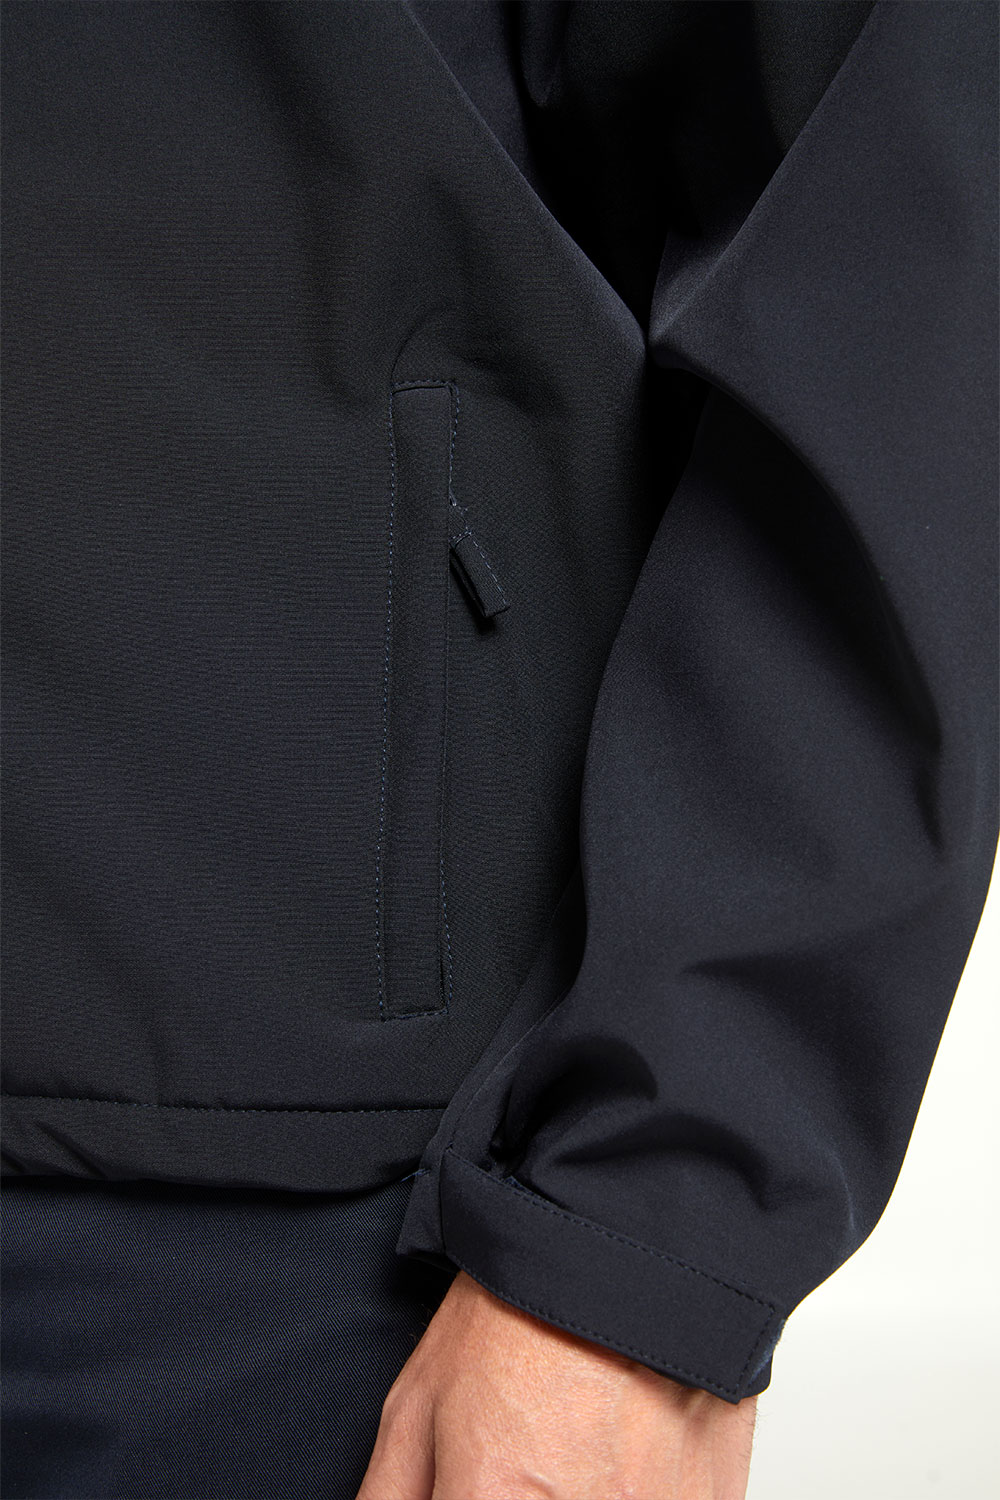 Navy Soft Shell Jacket | Sugdens | Corporate Clothing, Uniforms and ...